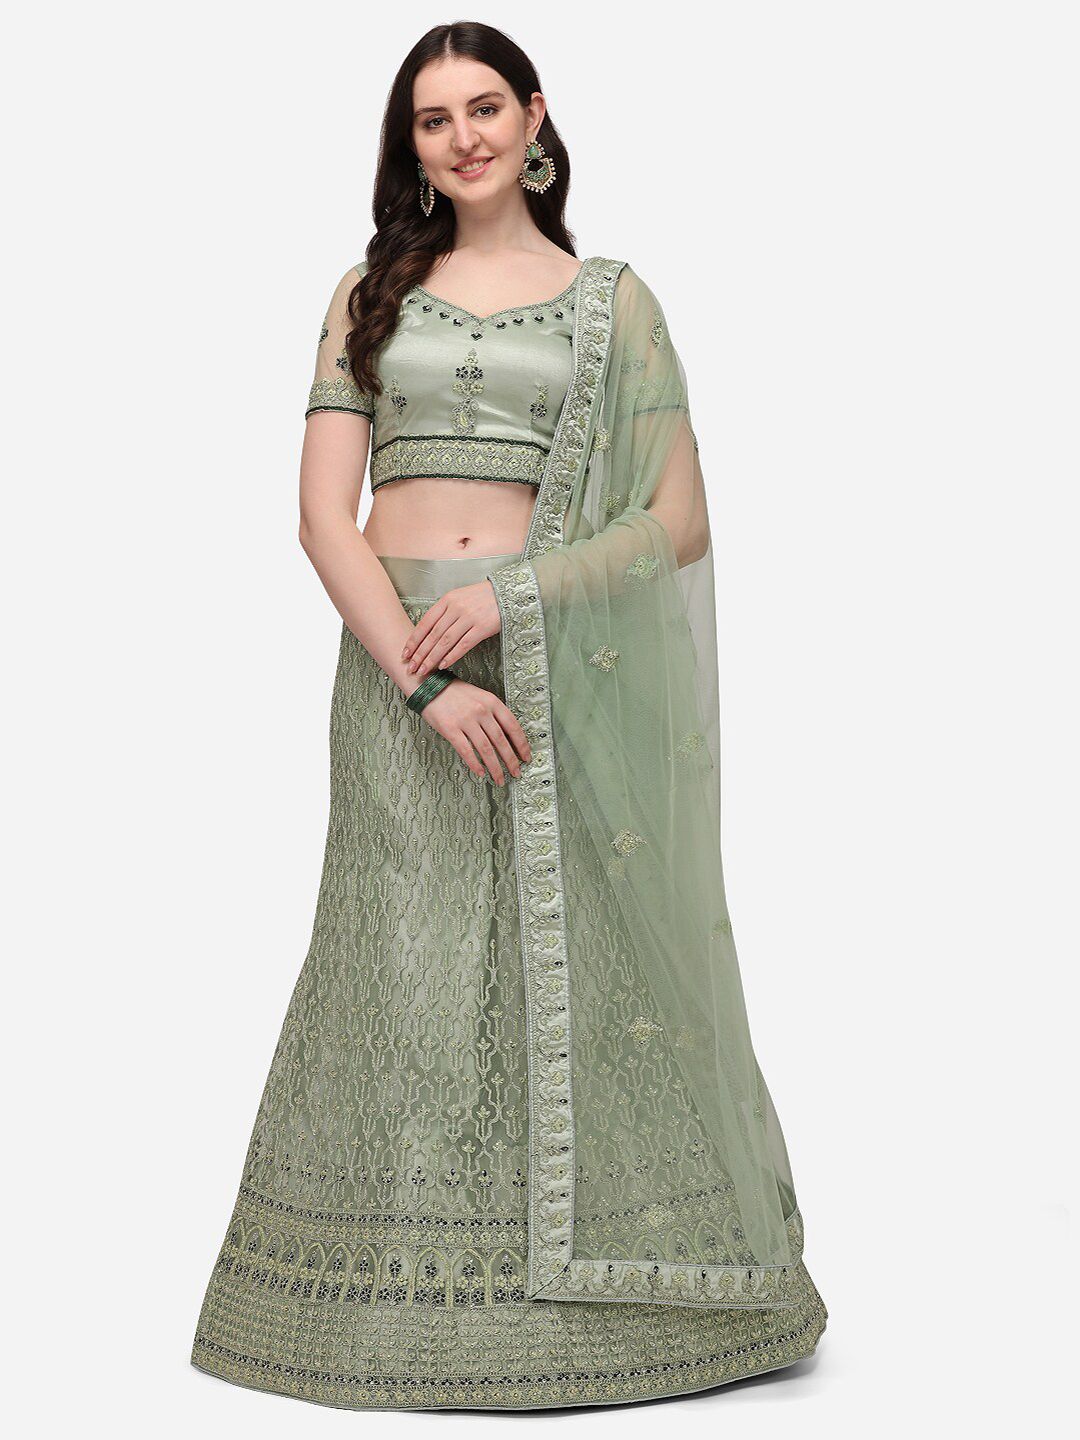 VRSALES Lime Green & Silver-Toned Embroidered Semi-Stitched Lehenga & Unstitched Blouse With Dupatta Price in India